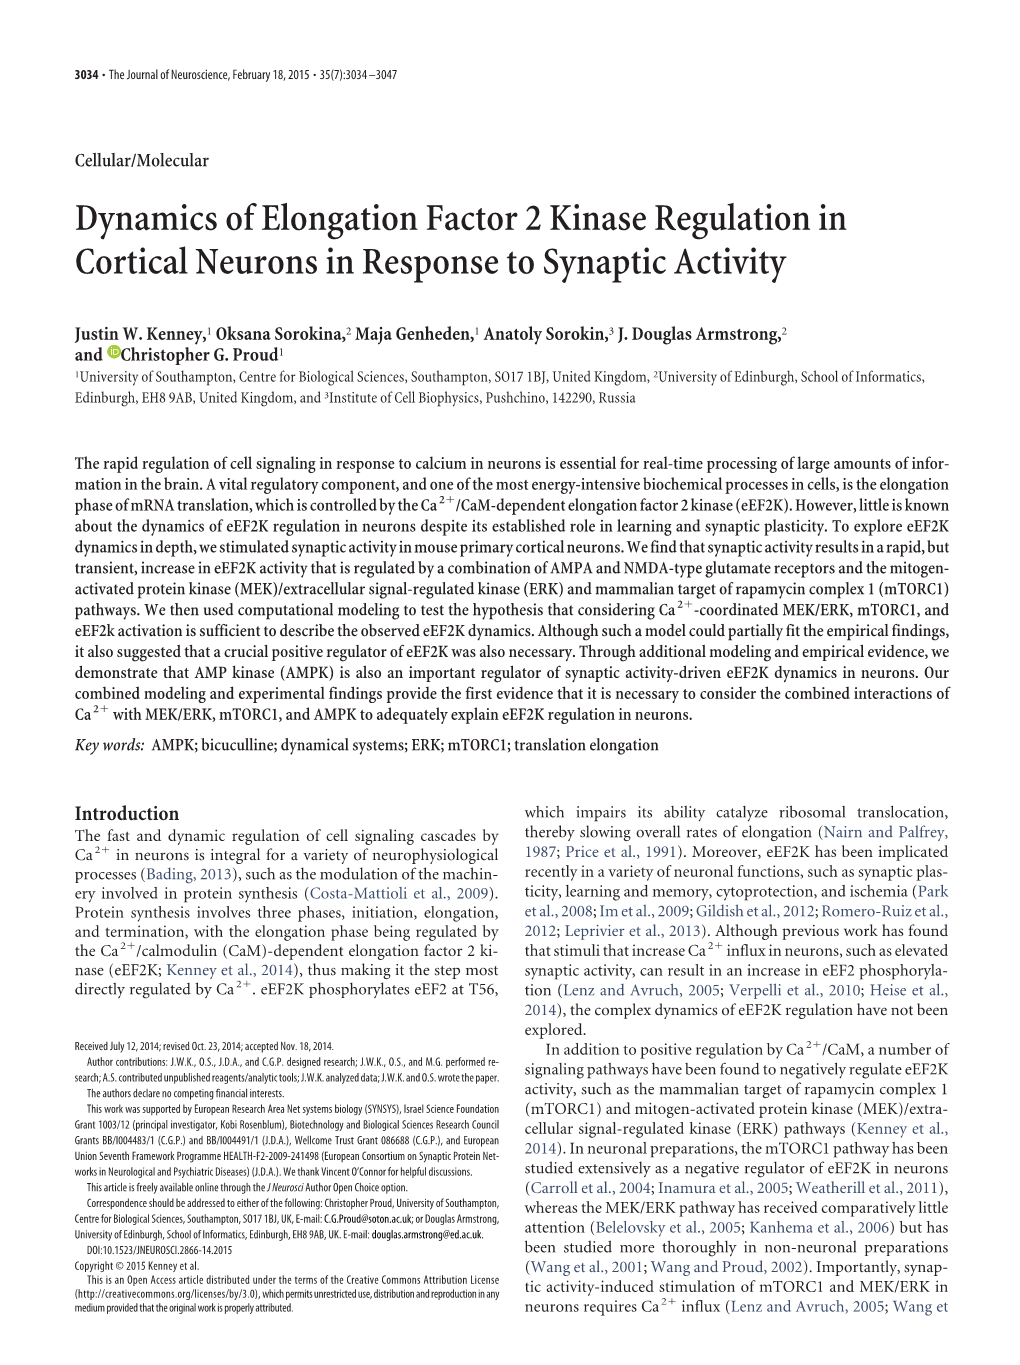 Dynamics of Elongation Factor 2 Kinase Regulation in Cortical Neurons in Response to Synaptic Activity